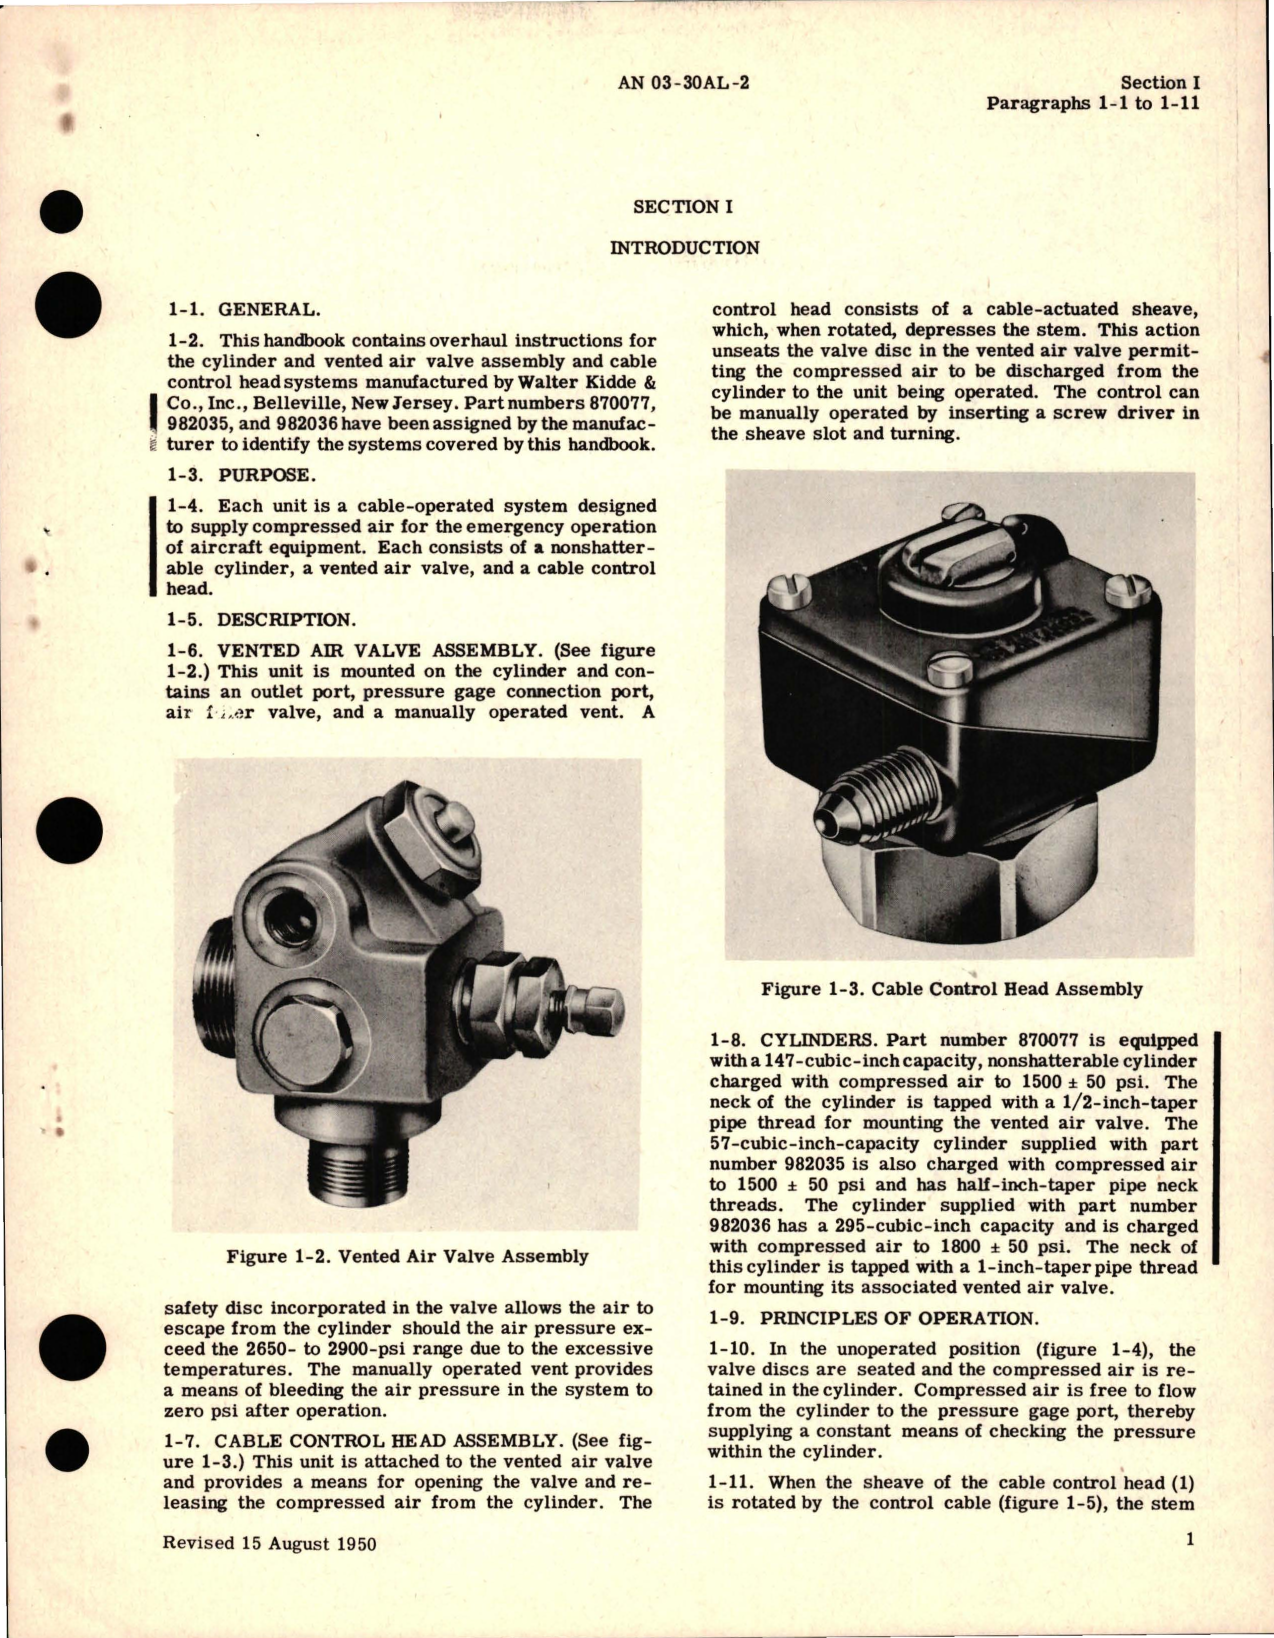 Sample page 5 from AirCorps Library document: Overhaul Instructions for Cylinder and Air Valves - Models 870077, 982035, and 982036 